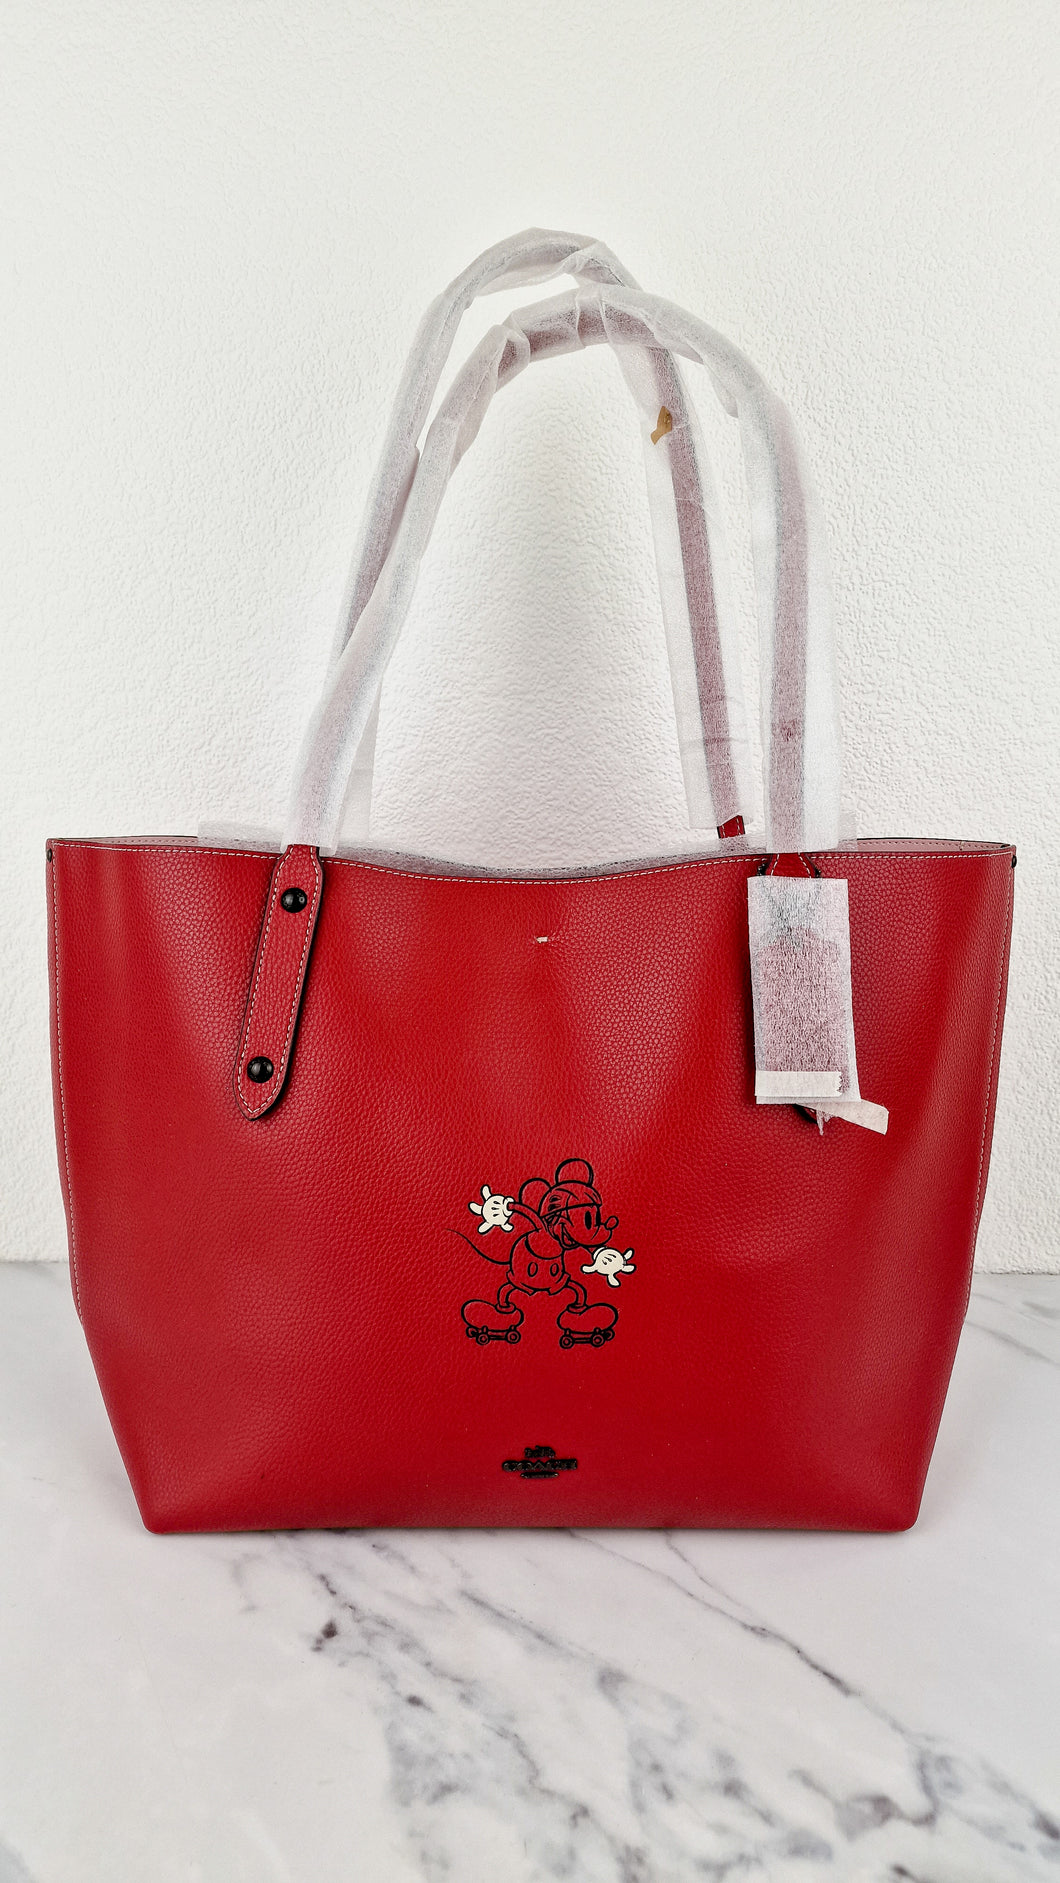 Disney x Coach Red Tote Bag with Mickey Mouse on Roller Skates LIMITED EDITION - Coach 69181